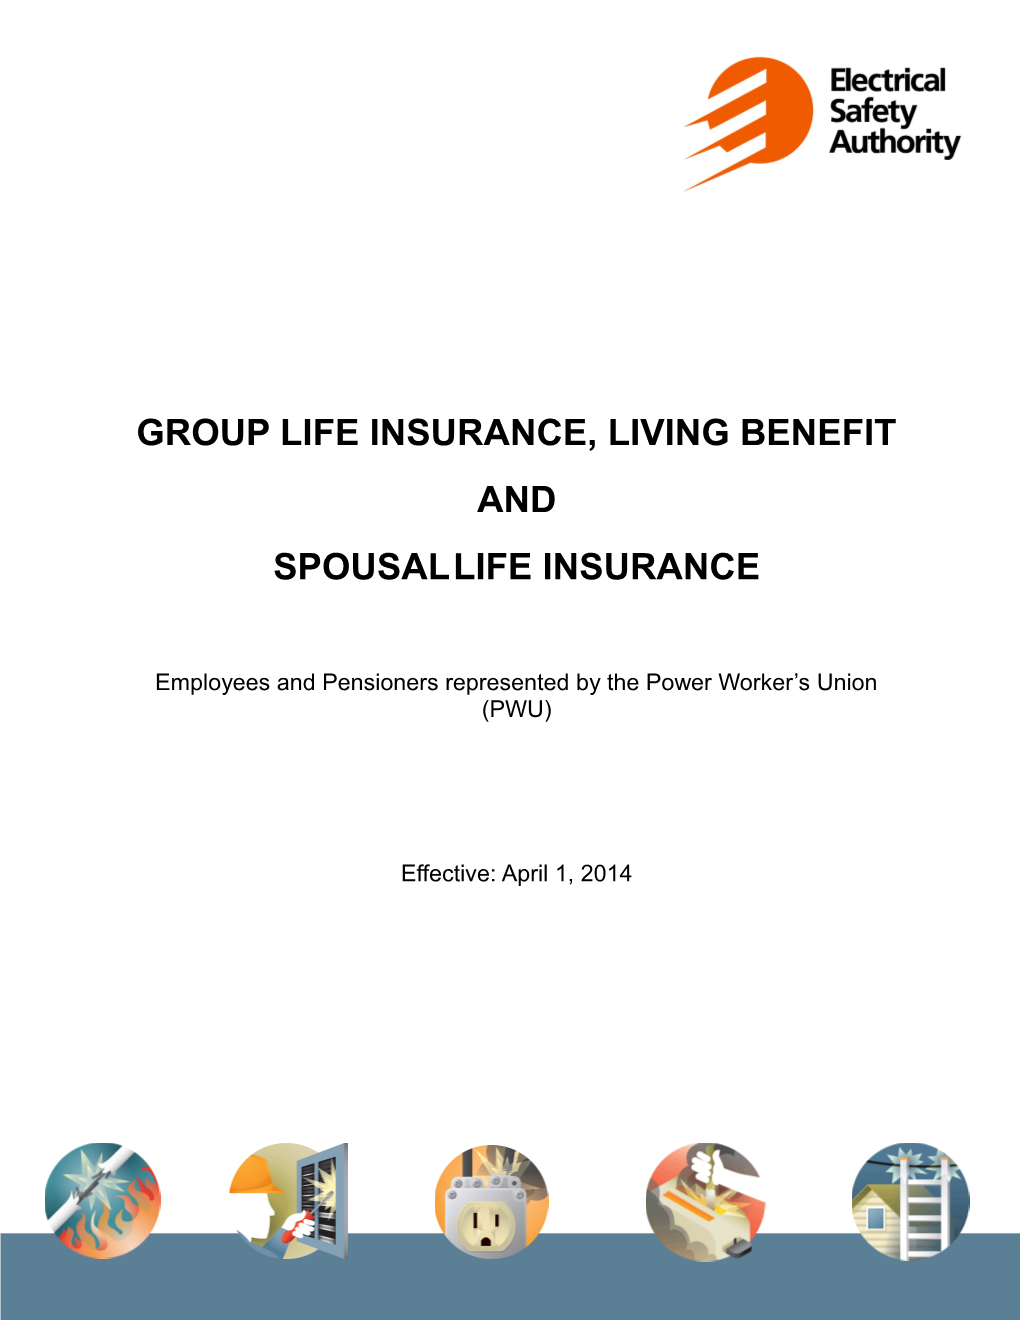 Group Life Insurance, Living Benefit